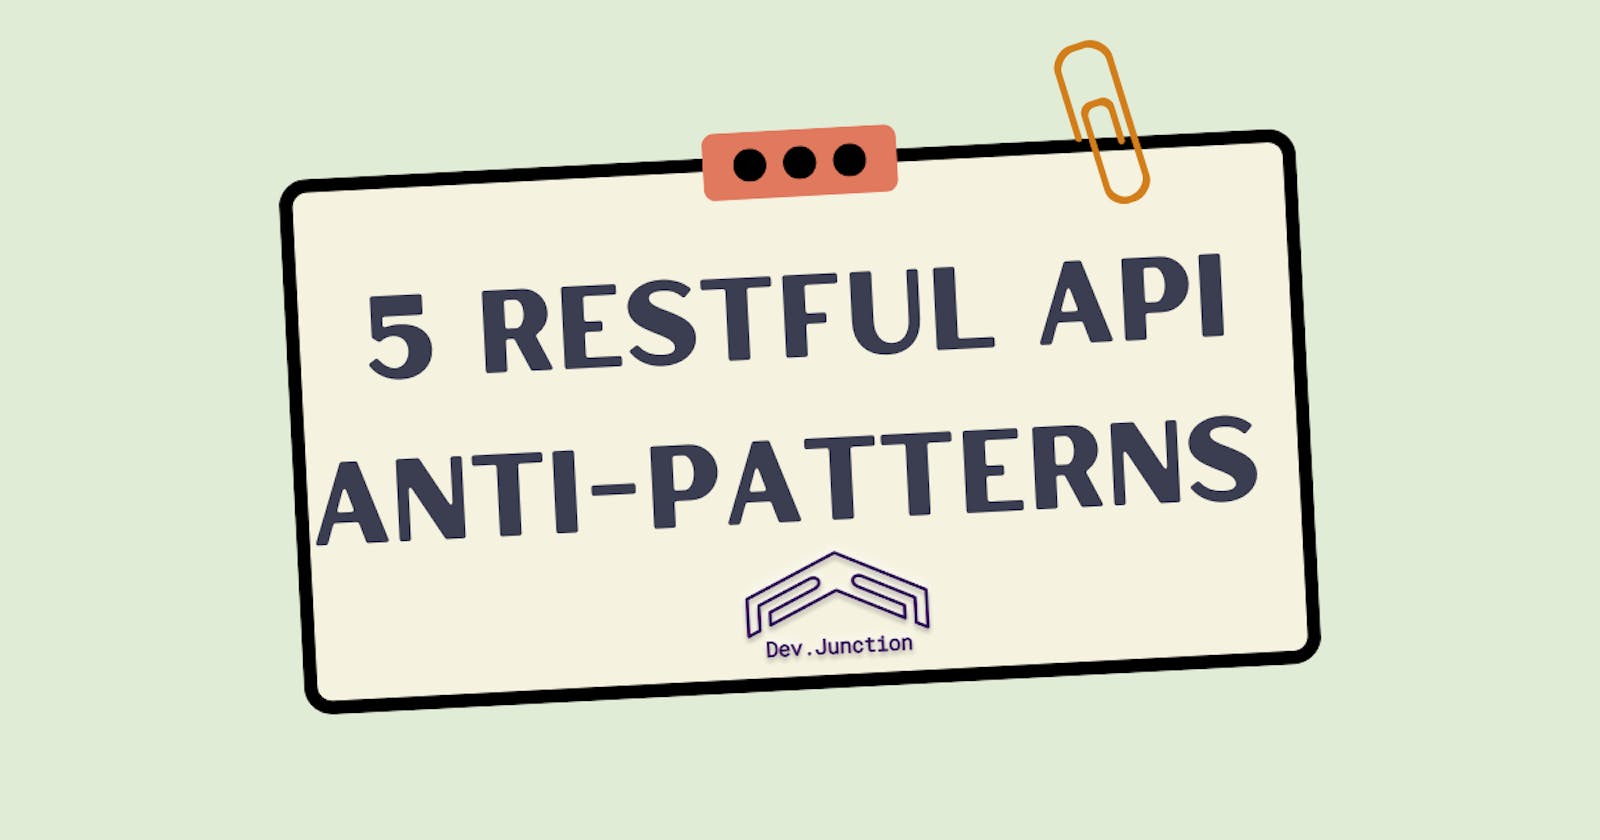 5 Common Restful API Anti-Patterns and How to Avoid Them